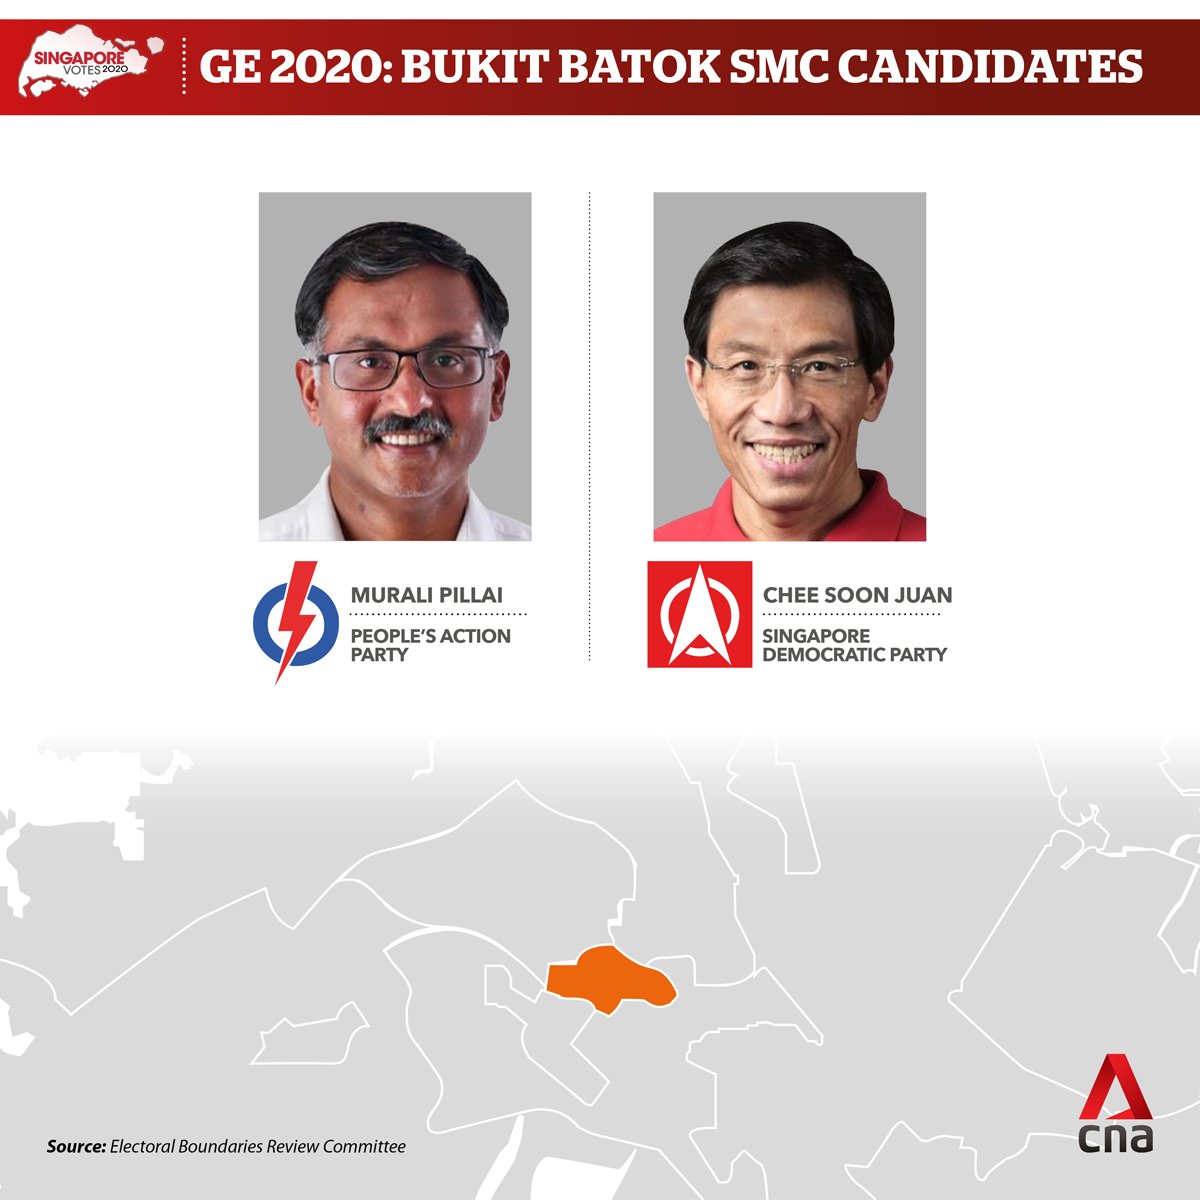  #GE2020  : It will be PAP's Murali Pillai taking on the challenge from SDP chief Chee Soon Juan in Bukit Batok SMC  https://cna.asia/3ifG61m 